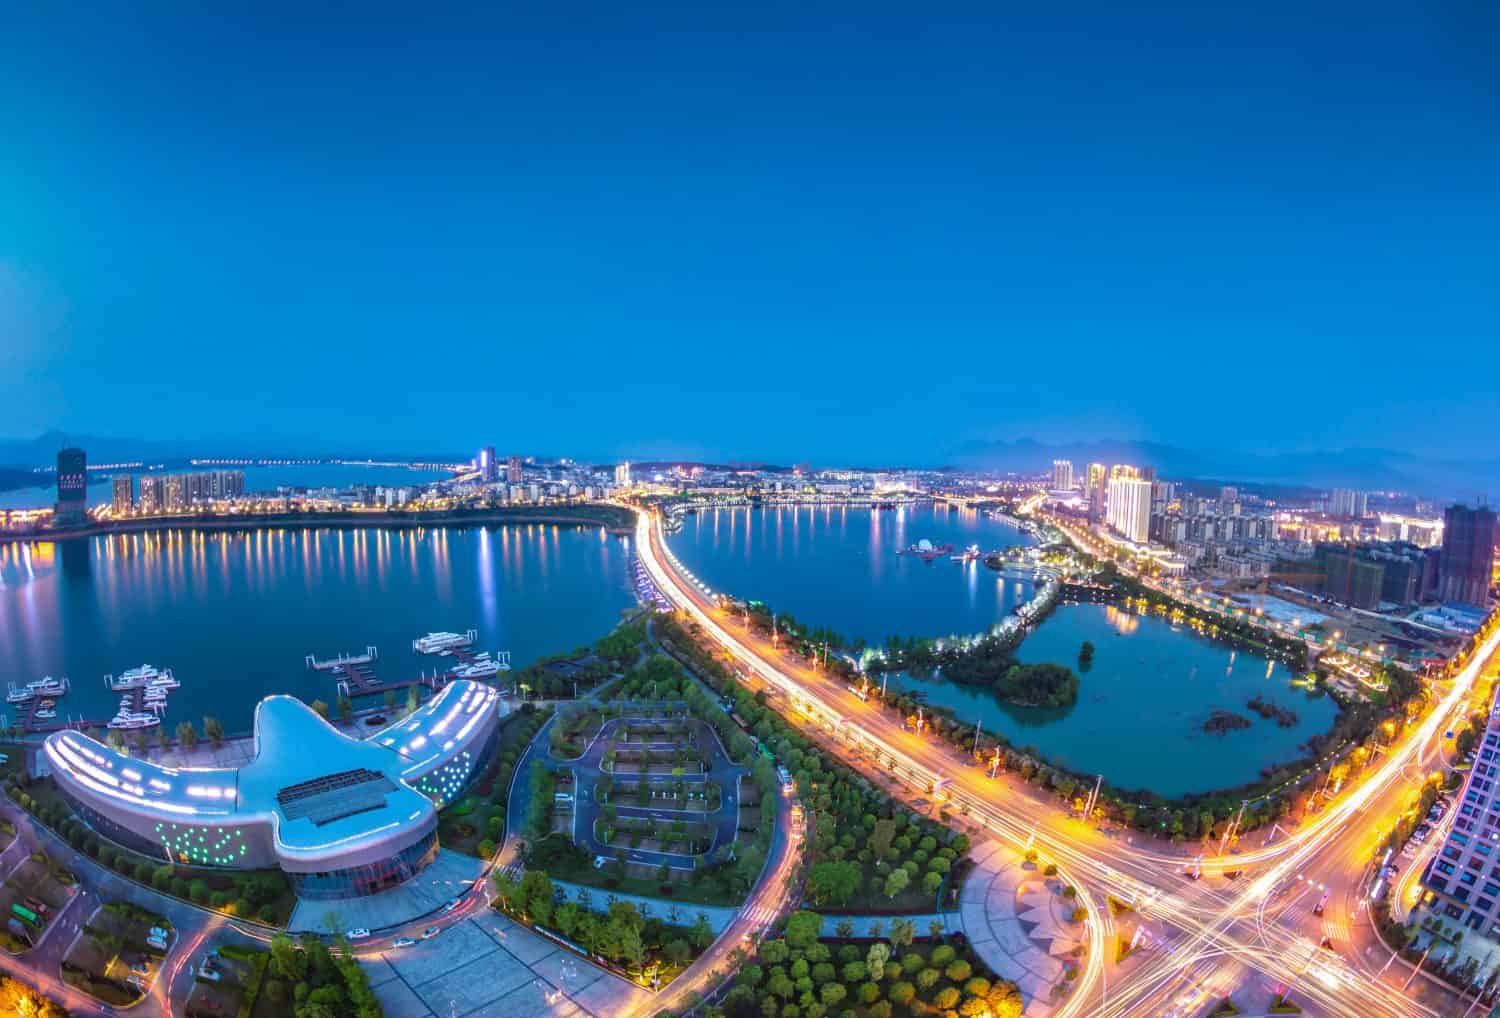 A bird's eye view of Wuning County, China's most beautiful city in the twilight, is located in Jiujiang City, Jiangxi Province, in eastern China, surrounded by mountains and rivers.